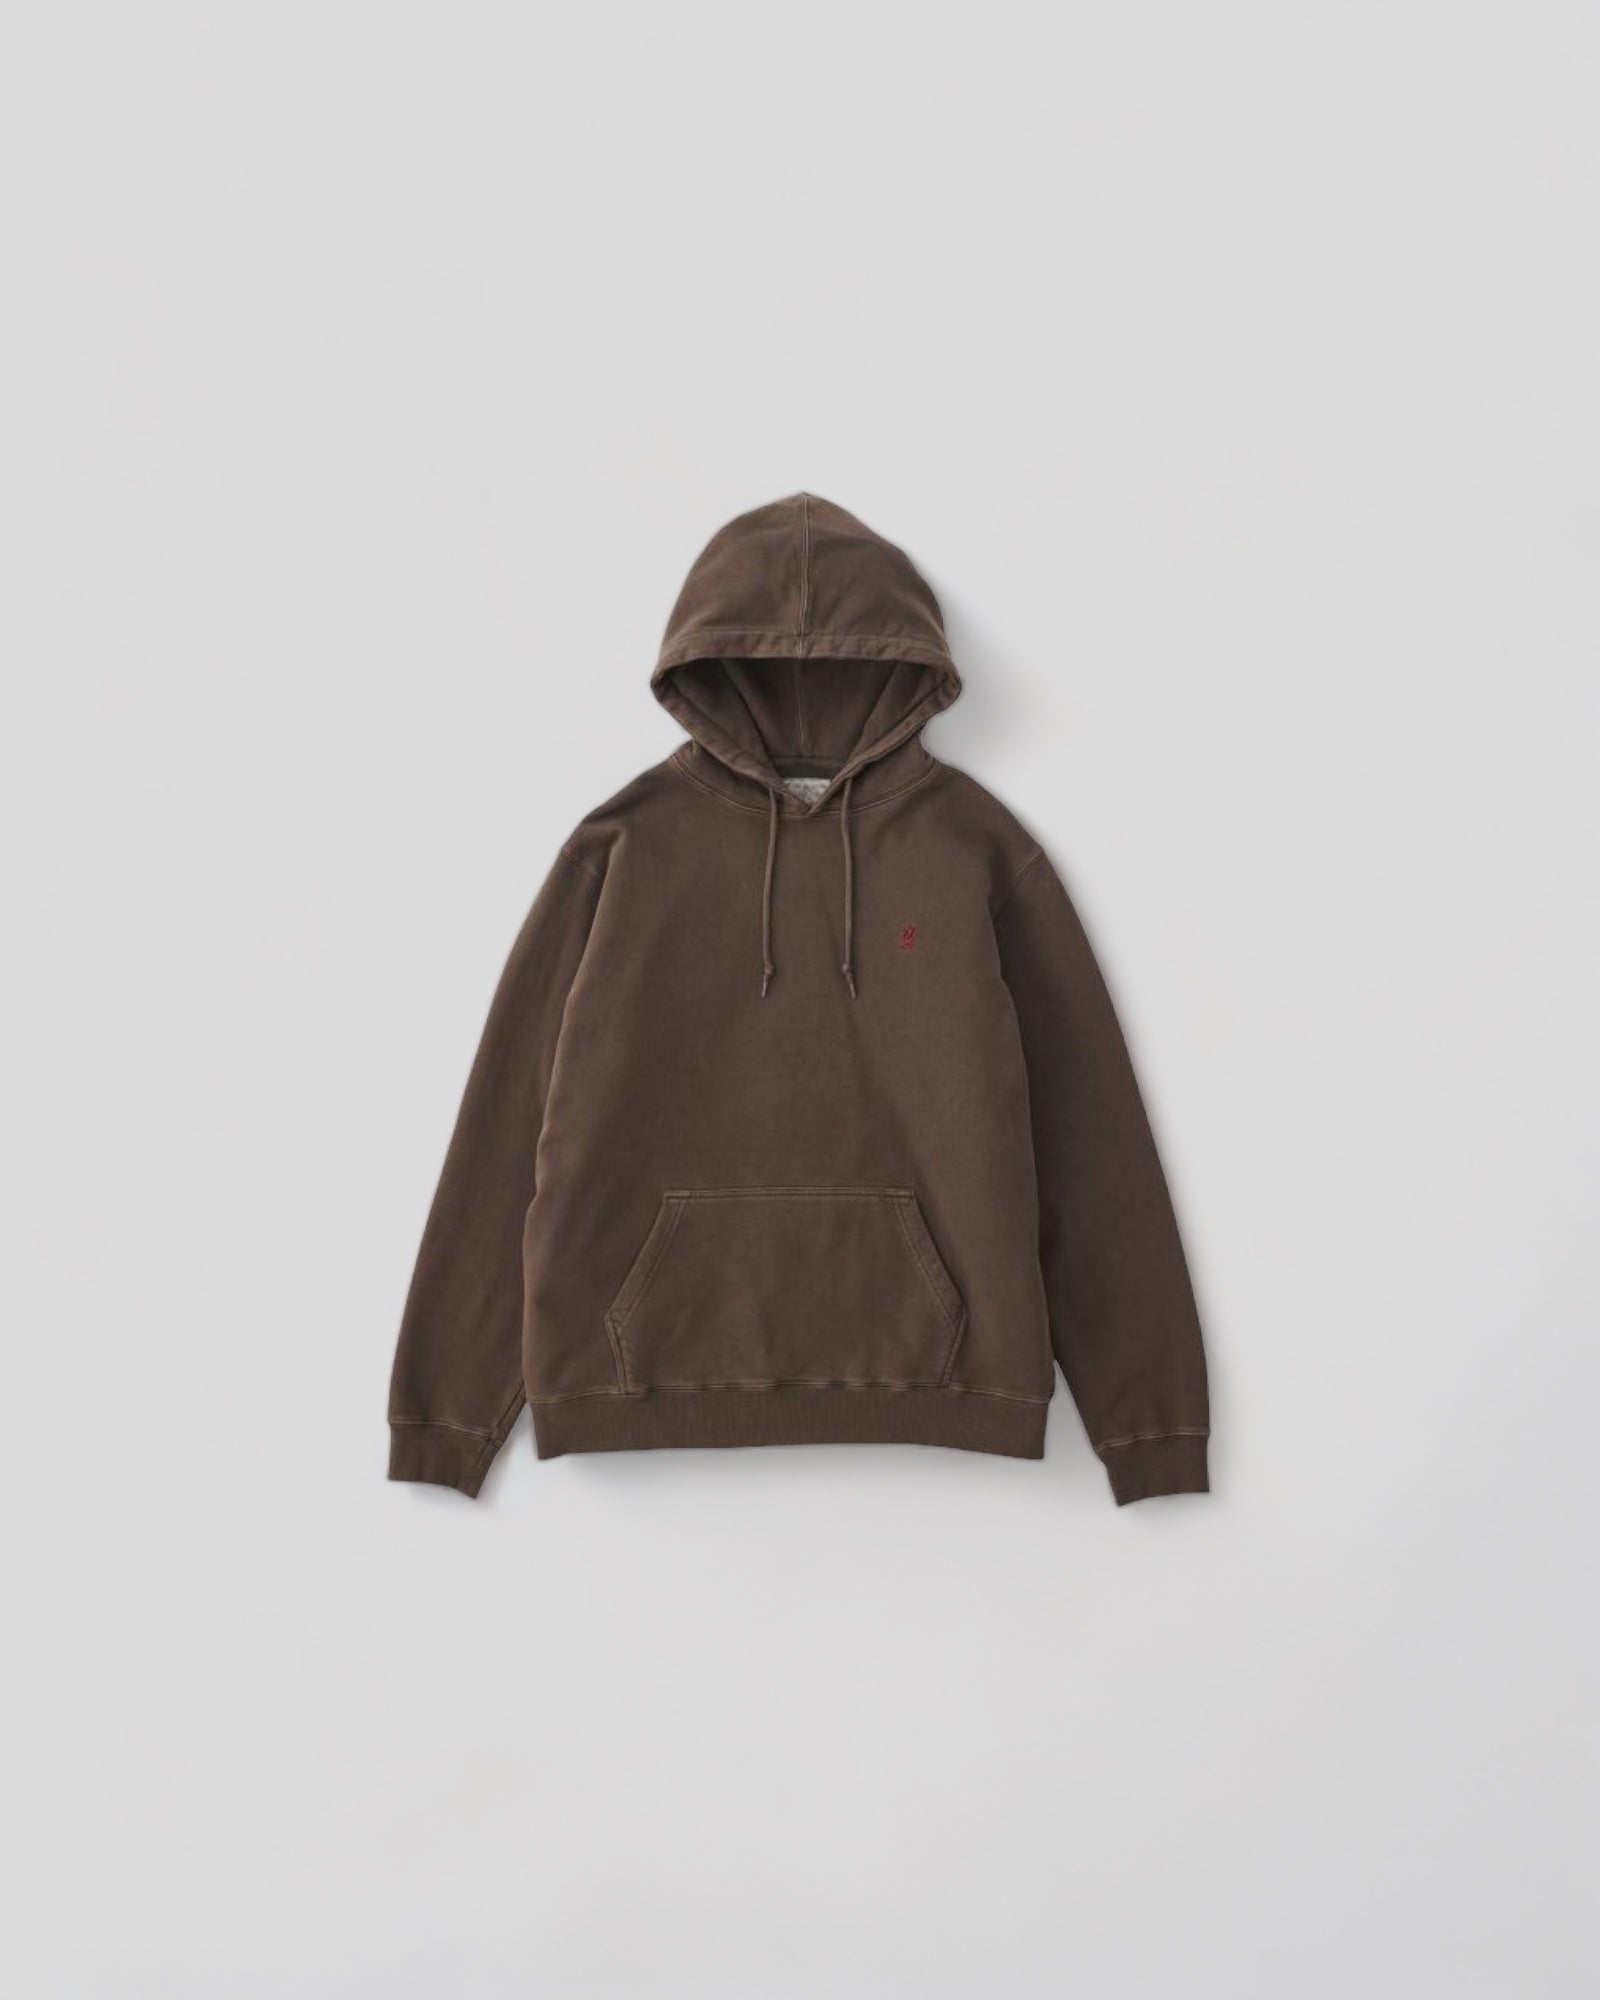 Gramicci - One Point Hooded Sweatshirt - Brown Pigment